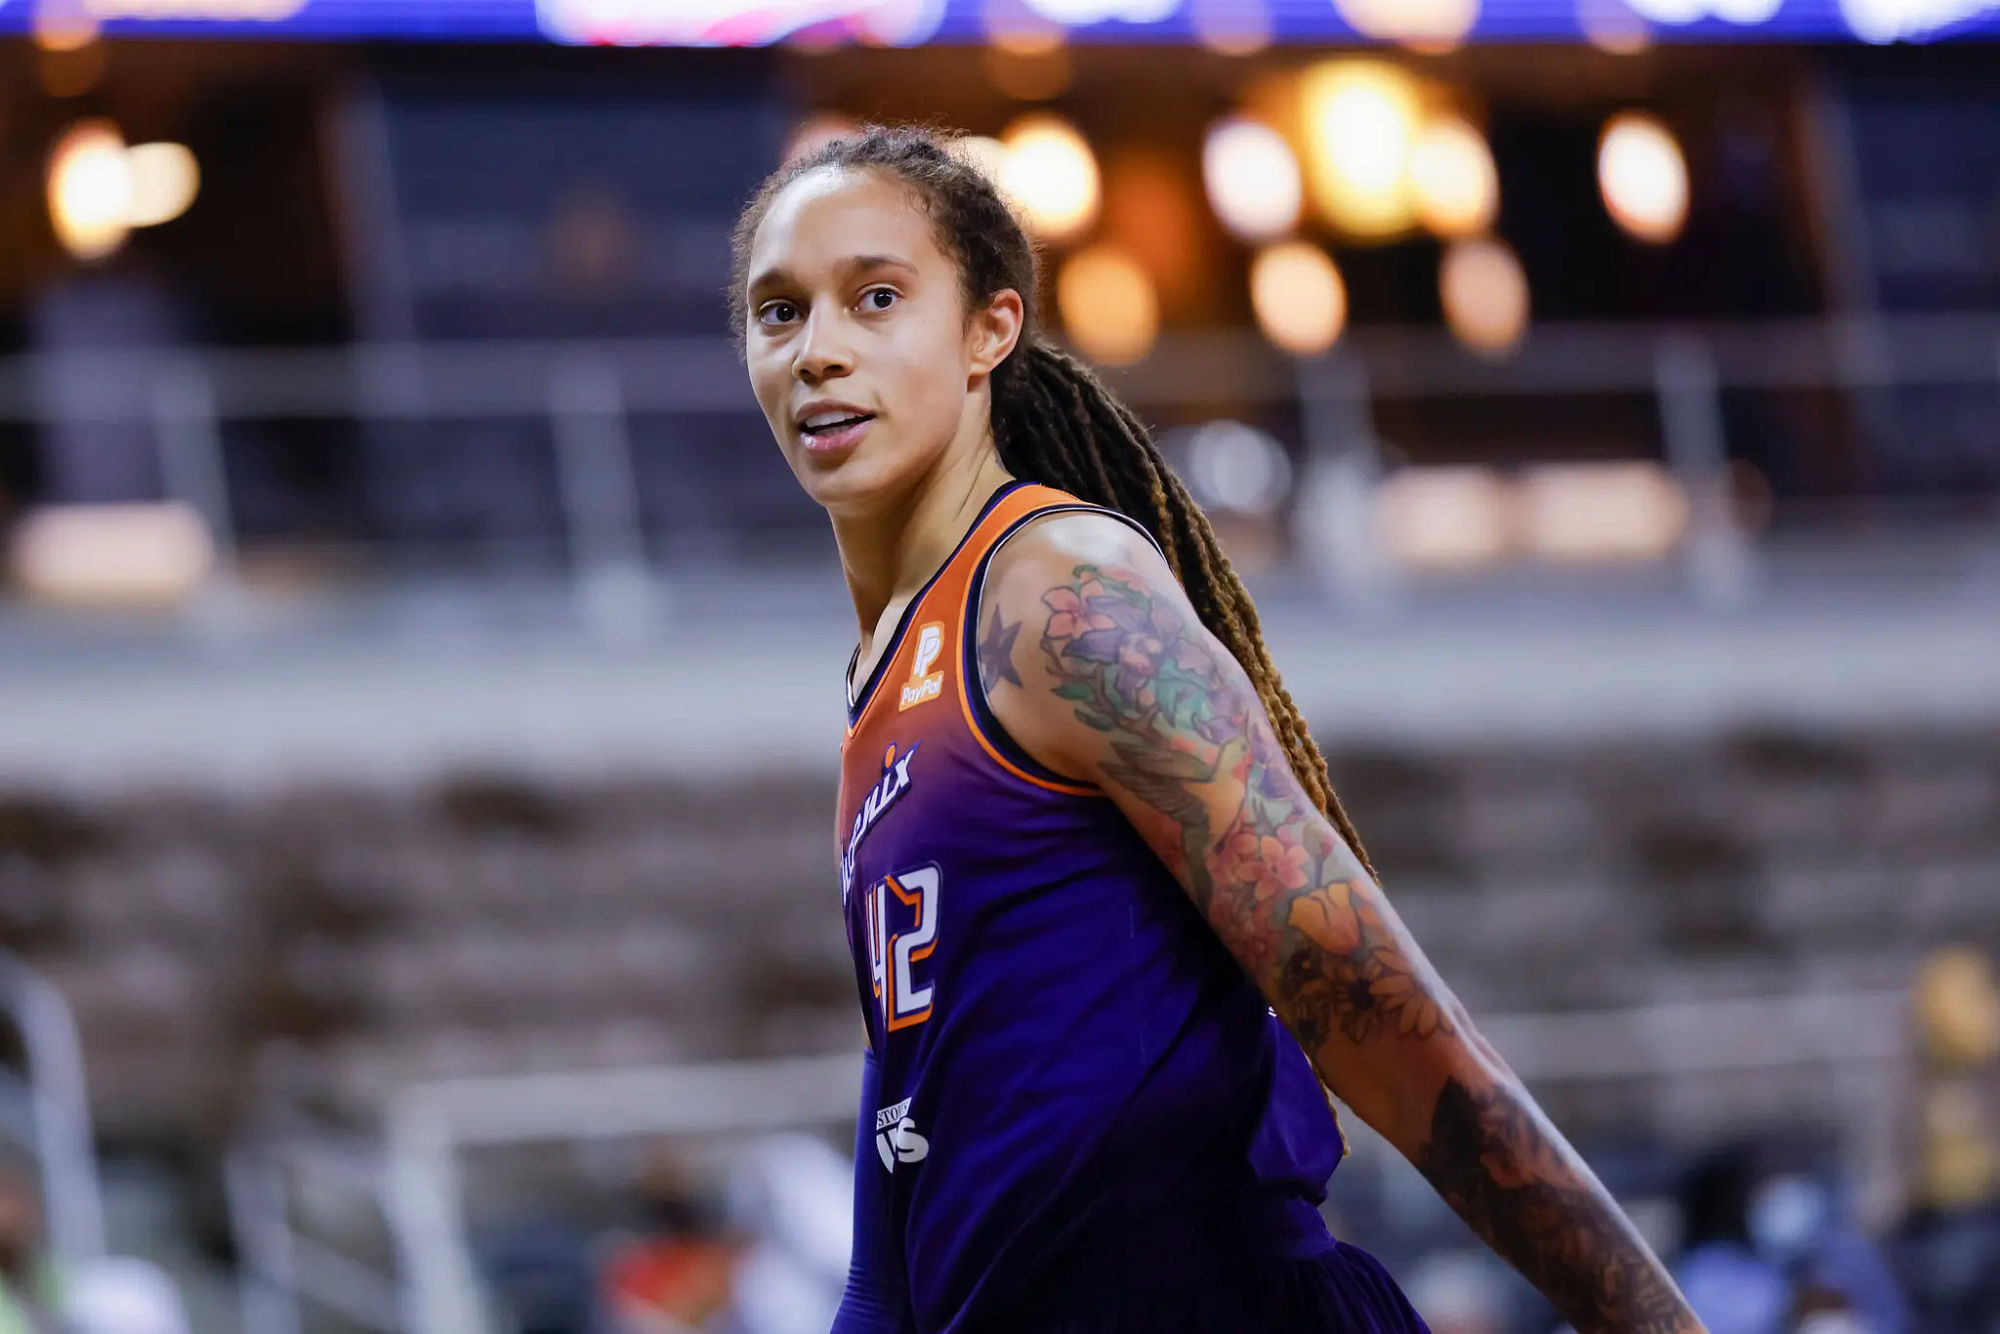 <div class="paragraphs"><p>Brittney Griner, of the Women's National Basketball Player's Association (WNBA), plays for Phoenix Mercury team in the United States and has been sentenced to nine years in Russian prison.&nbsp;</p></div>